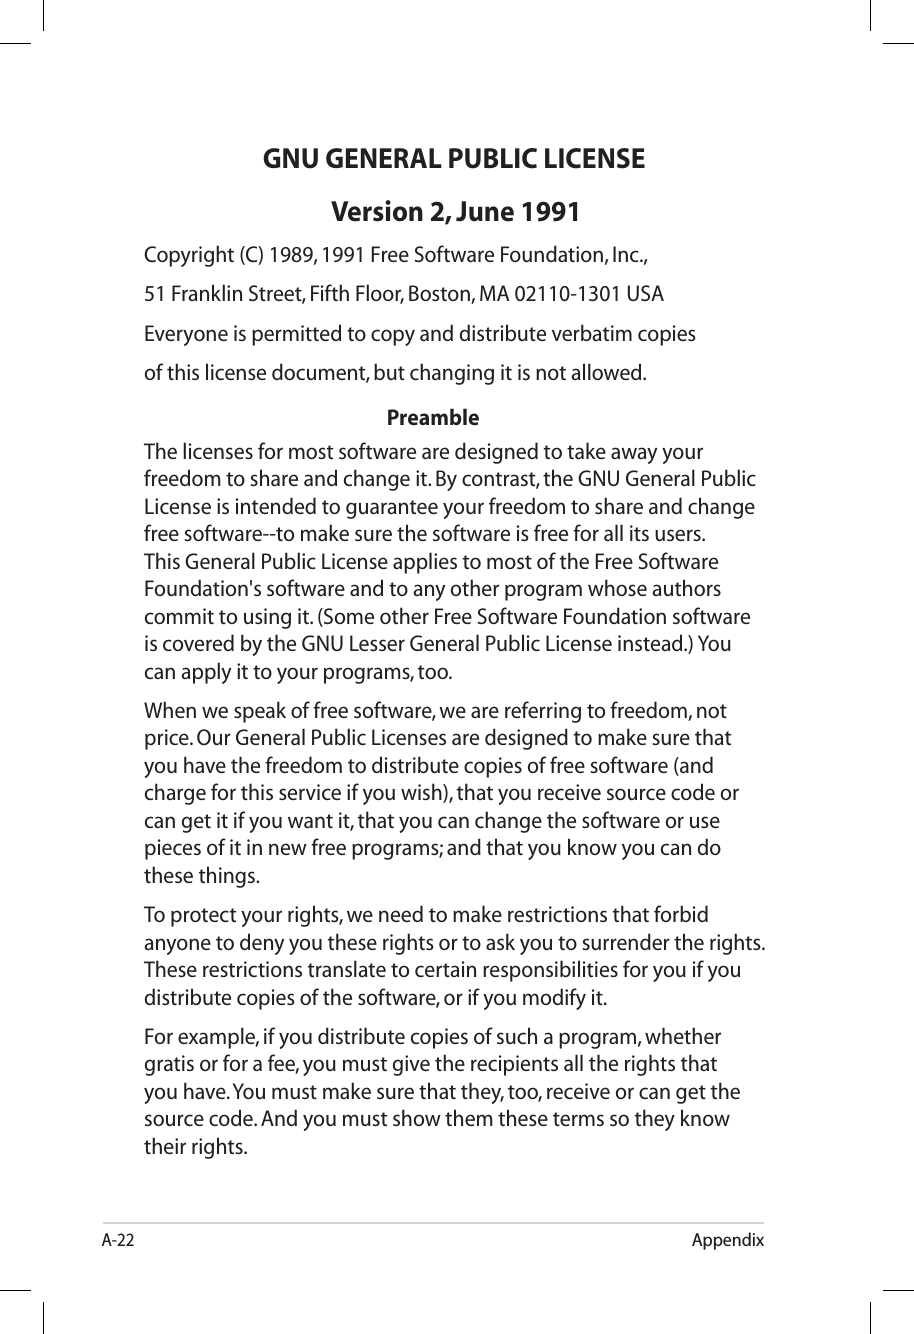 A-22AppendixGNU GENERAL PUBLIC LICENSE Version 2, June 1991Copyright (C) 1989, 1991 Free Software Foundation, Inc.,51 Franklin Street, Fifth Floor, Boston, MA 02110-1301 USAEveryone is permitted to copy and distribute verbatim copiesof this license document, but changing it is not allowed.          PreambleThe licenses for most software are designed to take away your freedom to share and change it. By contrast, the GNU General Public License is intended to guarantee your freedom to share and change free software--to make sure the software is free for all its users. This General Public License applies to most of the Free Software Foundation&apos;s software and to any other program whose authors commit to using it. (Some other Free Software Foundation software is covered by the GNU Lesser General Public License instead.) You can apply it to your programs, too.When we speak of free software, we are referring to freedom, not price. Our General Public Licenses are designed to make sure that you have the freedom to distribute copies of free software (and charge for this service if you wish), that you receive source code or can get it if you want it, that you can change the software or use pieces of it in new free programs; and that you know you can do these things.To protect your rights, we need to make restrictions that forbid anyone to deny you these rights or to ask you to surrender the rights. These restrictions translate to certain responsibilities for you if you distribute copies of the software, or if you modify it. For example, if you distribute copies of such a program, whether gratis or for a fee, you must give the recipients all the rights that you have. You must make sure that they, too, receive or can get the source code. And you must show them these terms so they know their rights.